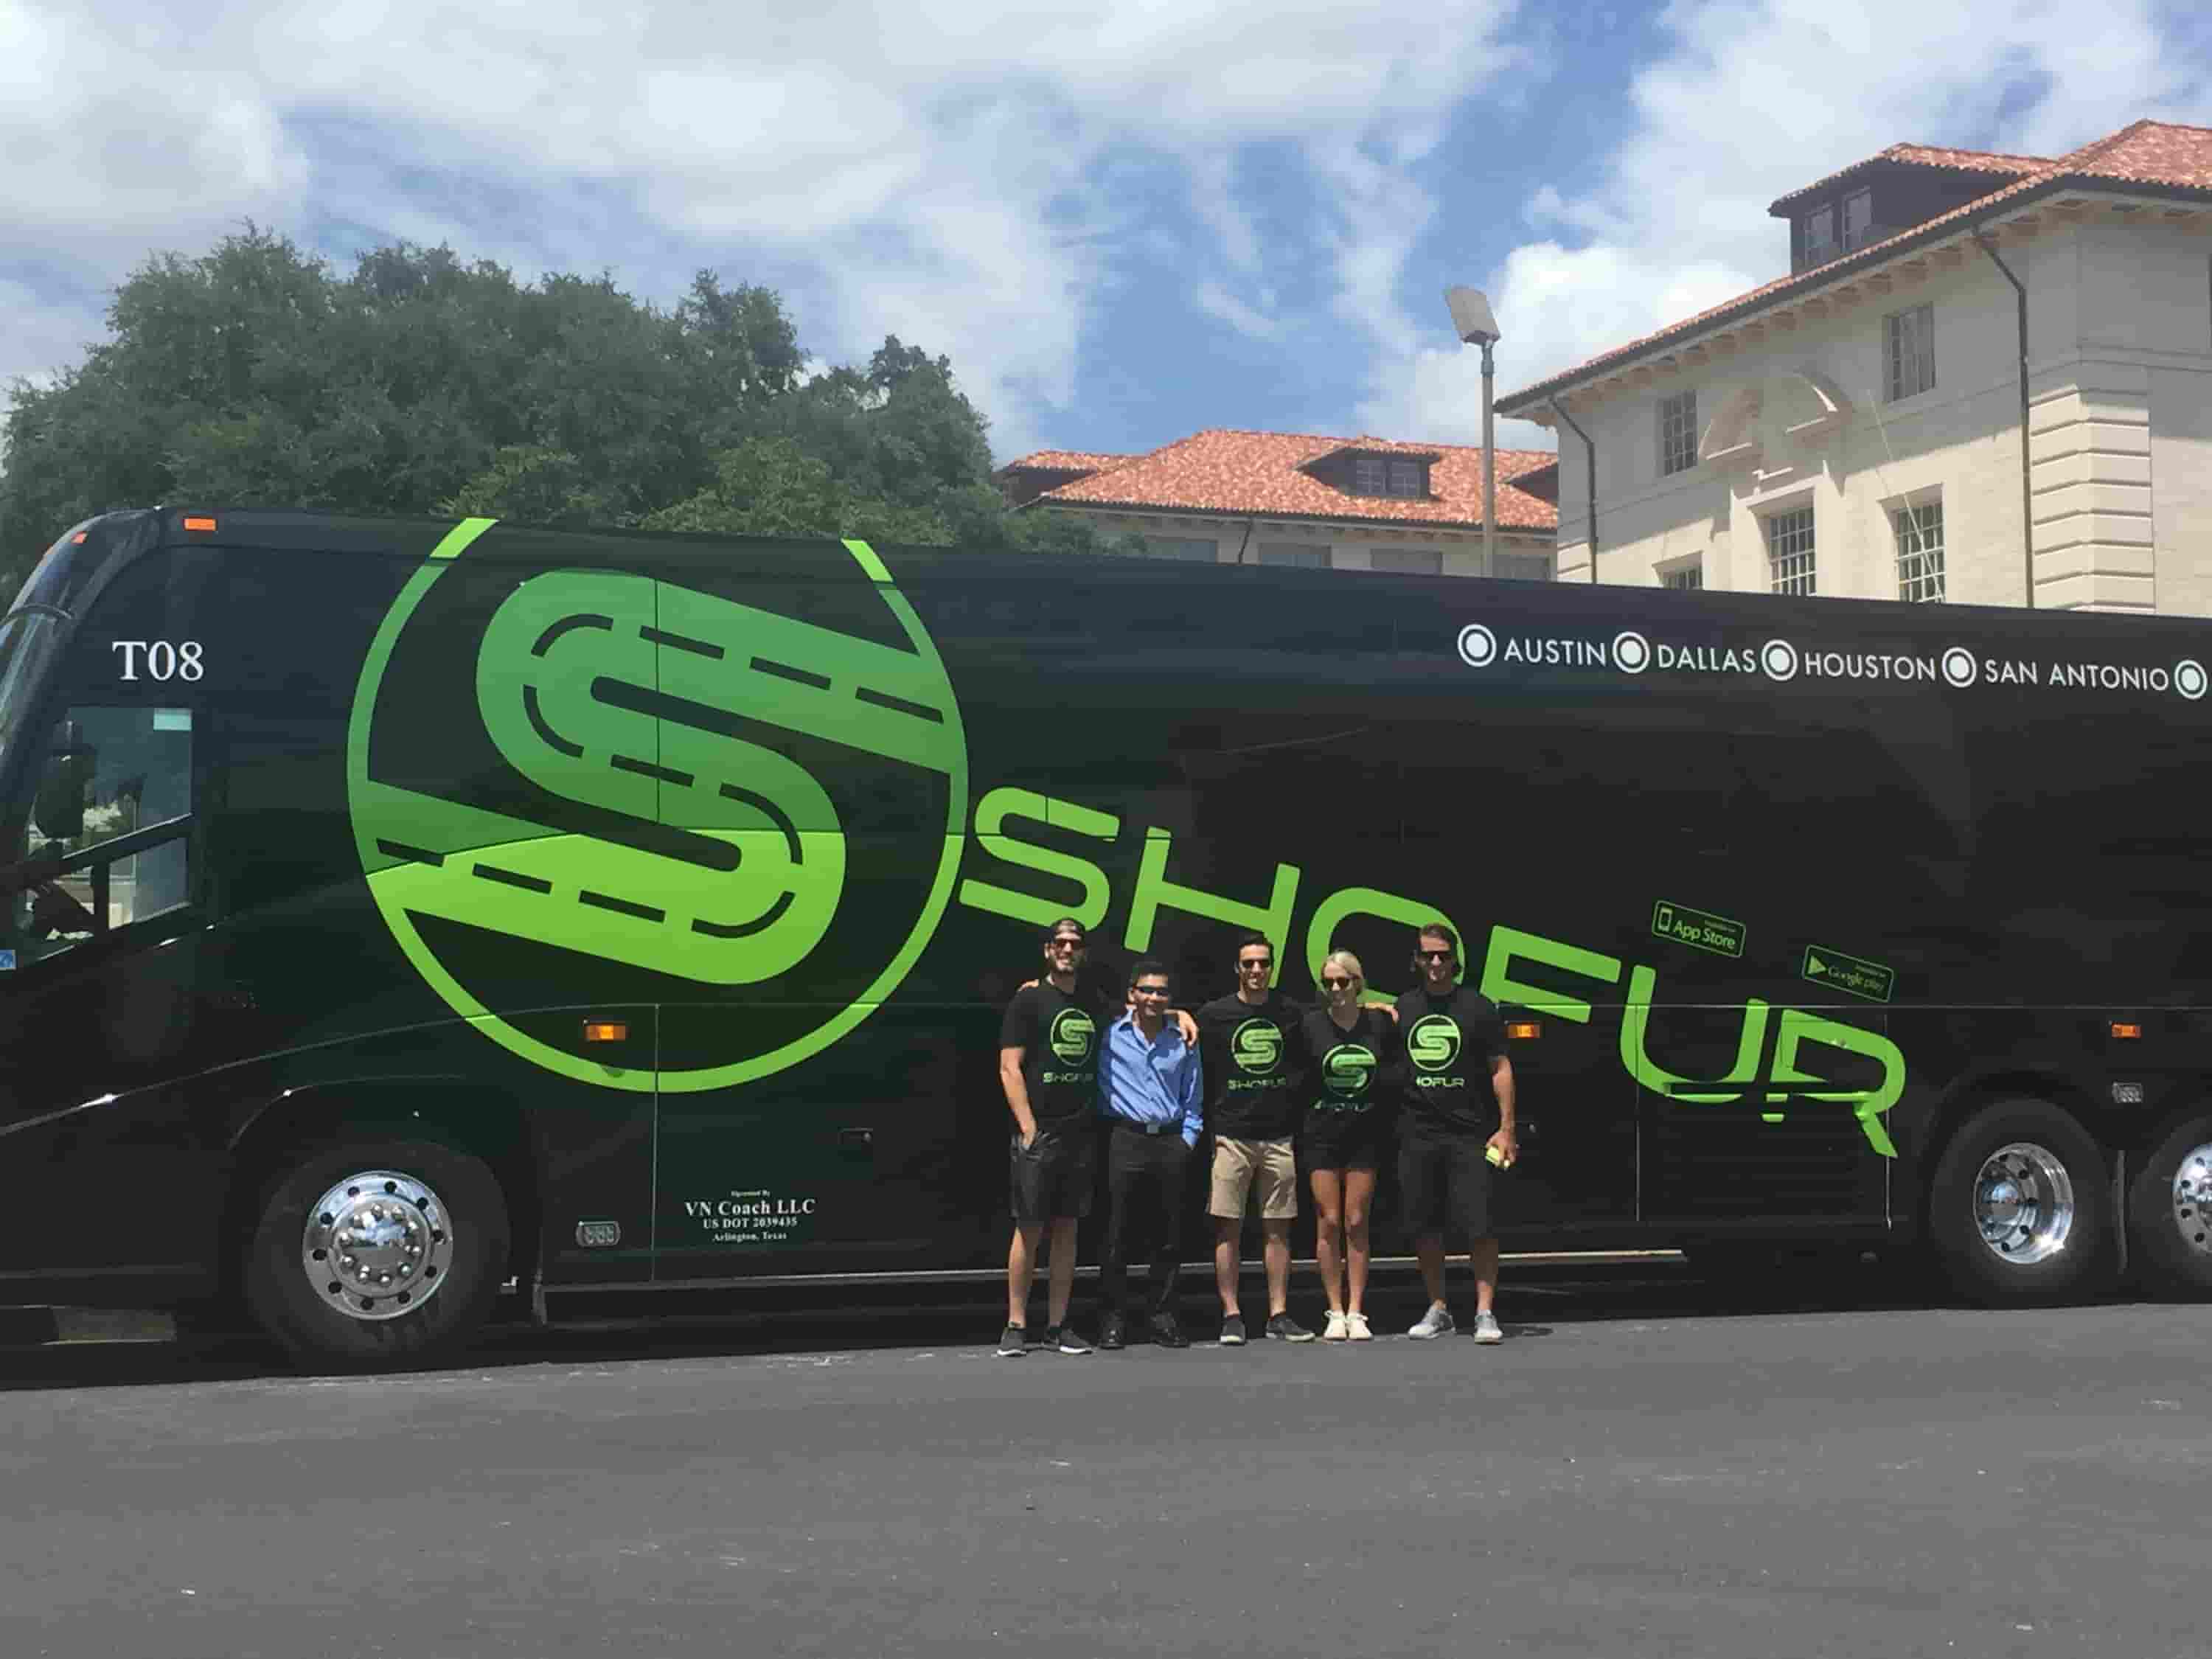 Tim and four other people standing in front of a Shofur charter bus.